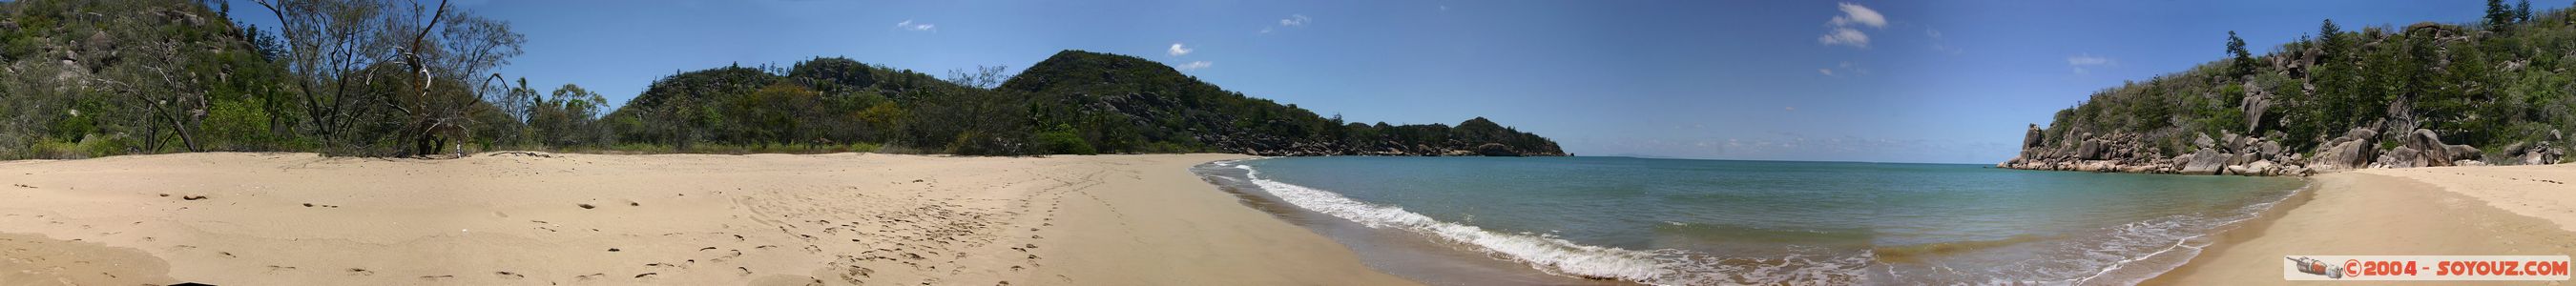 Magnetic Island - Radical Bay - panorama
Mots-clés: panorama plage mer